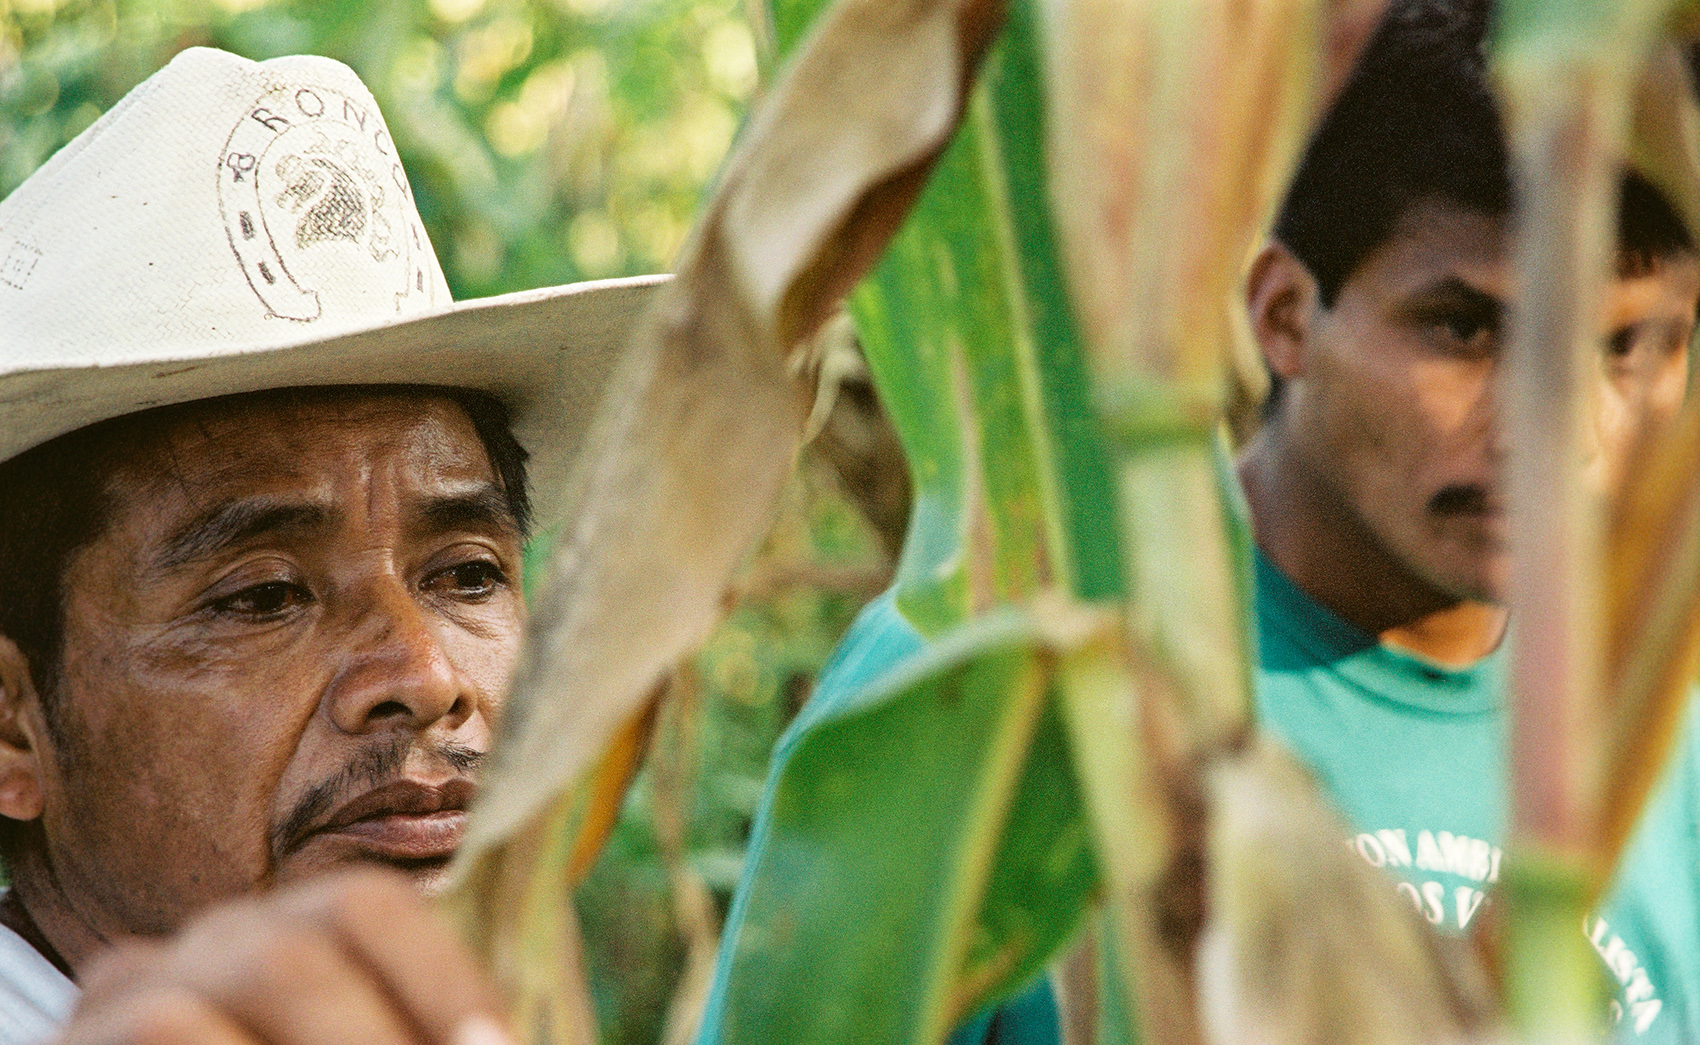 photo of two Campesinos (farmers) working in a Milpa (maize or corn field)